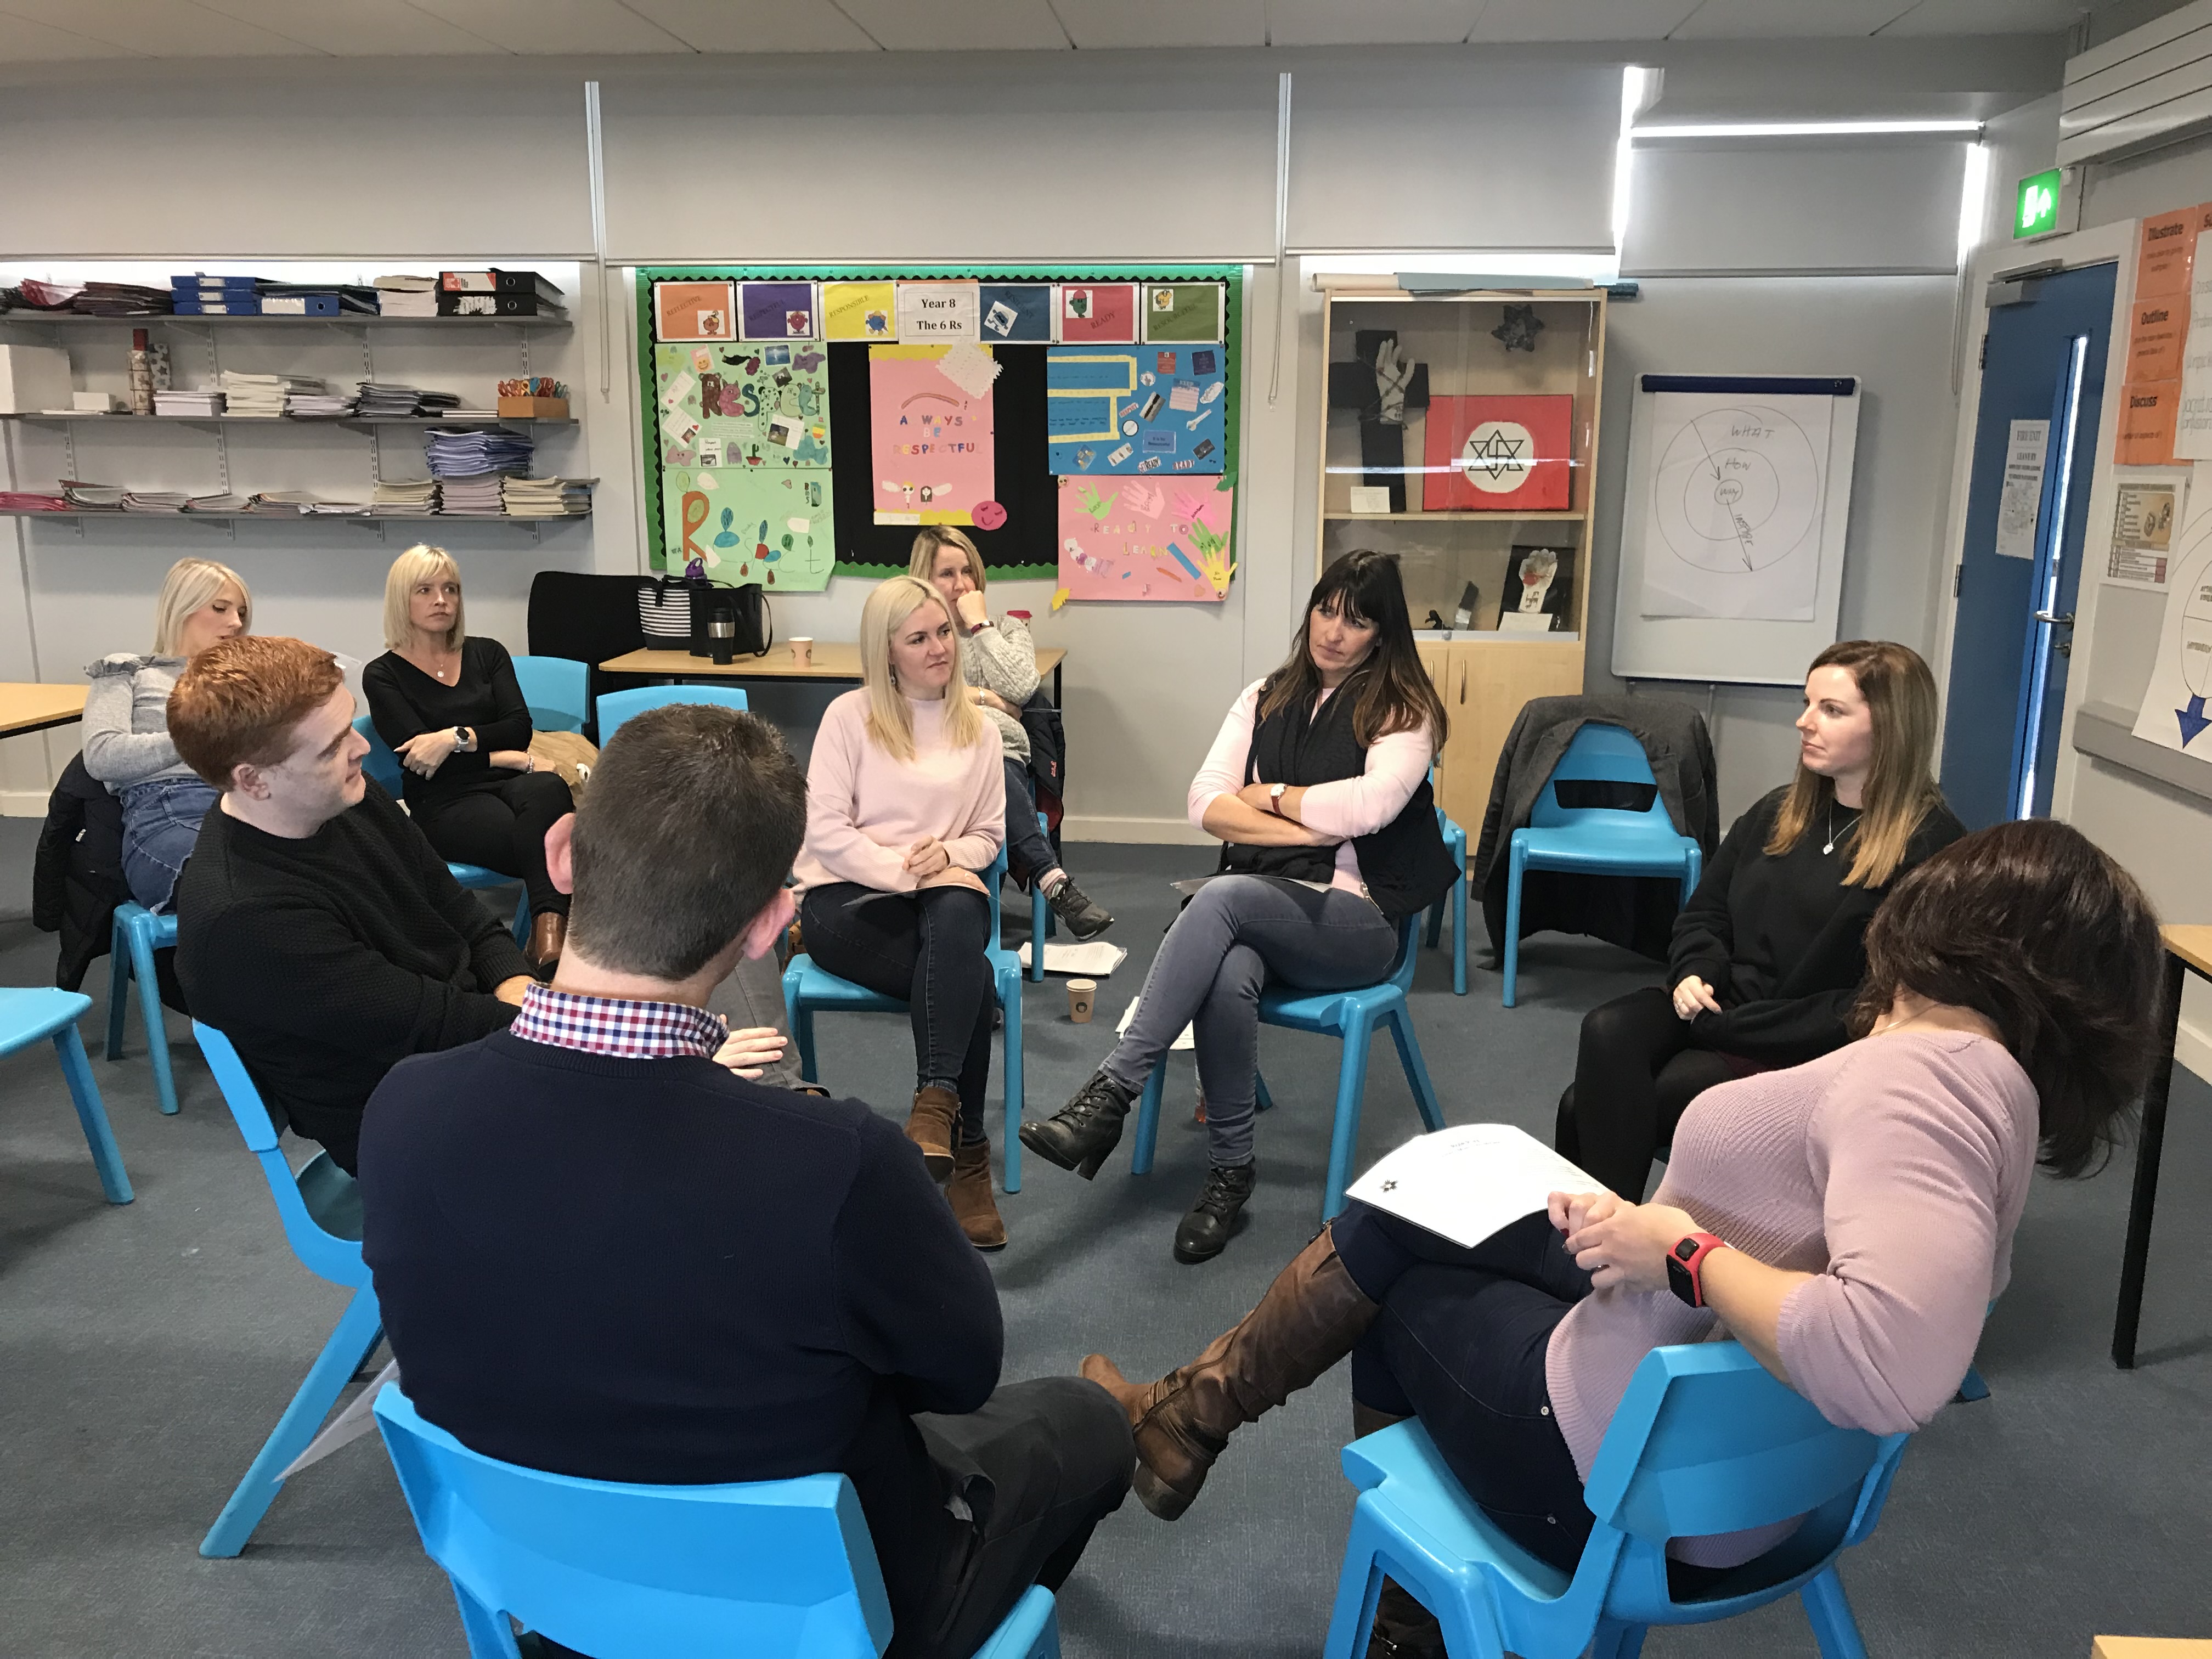 A group of teachers role playing a restorative conference, one teacher is clearly angry, sitting with her arms crossed defensively across her body while another teacher is talking to her.